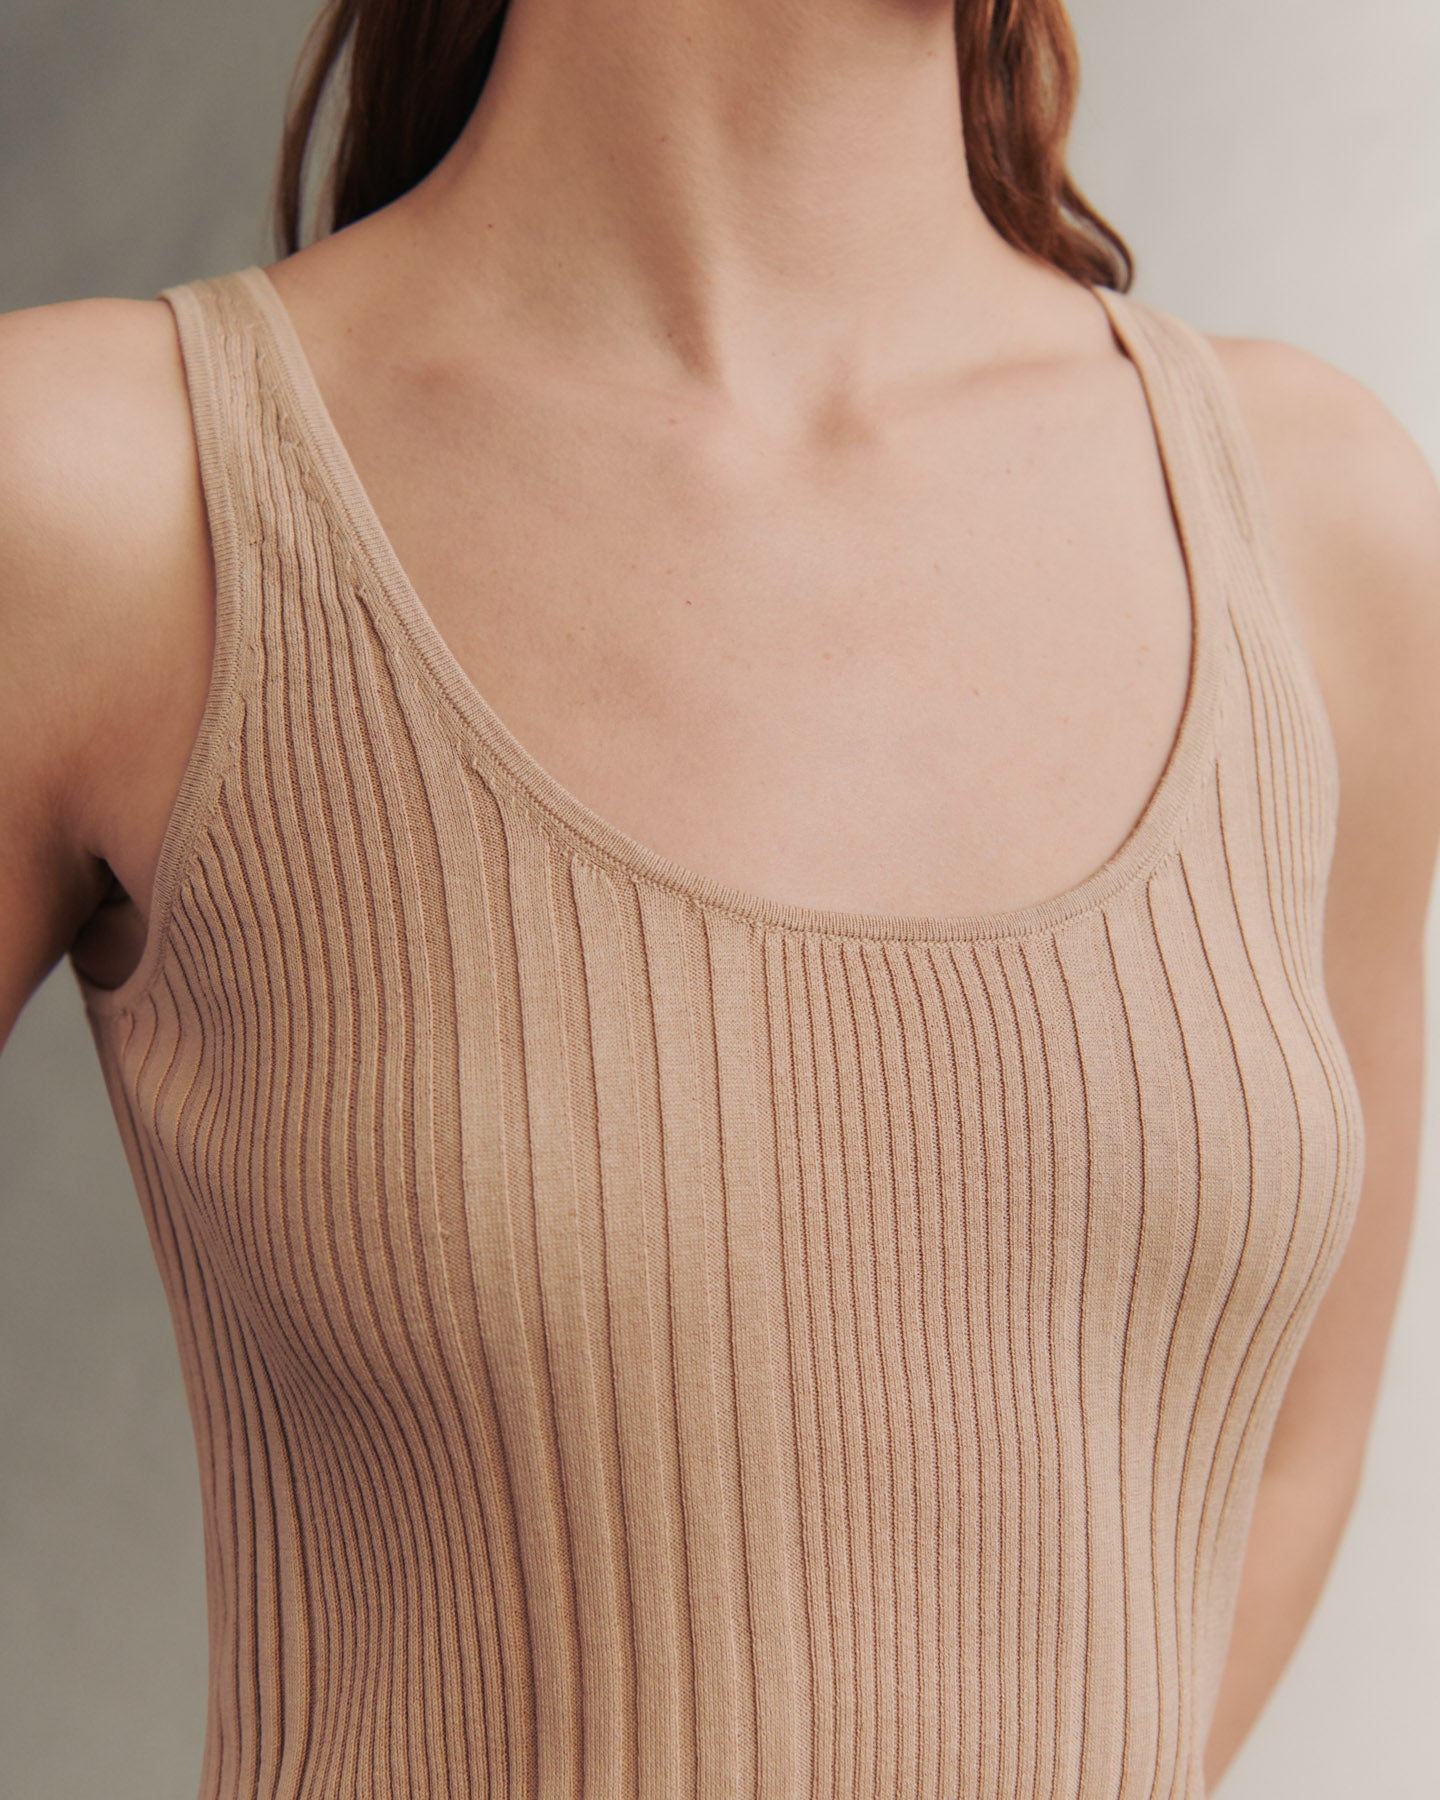 TWP Tan Second Base Top in Silk &amp; Cotton view 2